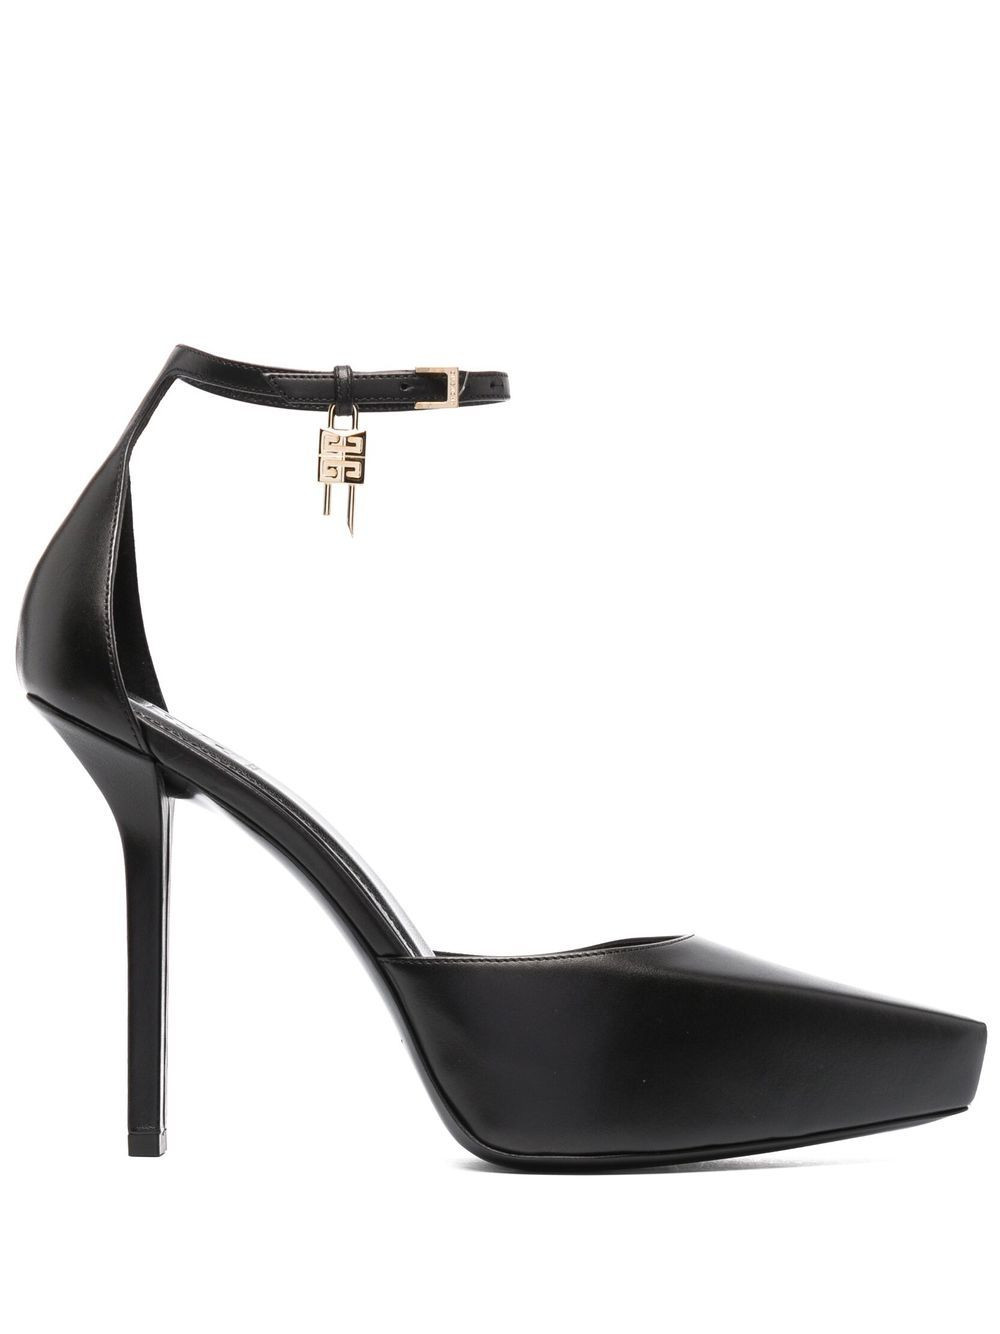 Givenchy G lock leather pumps